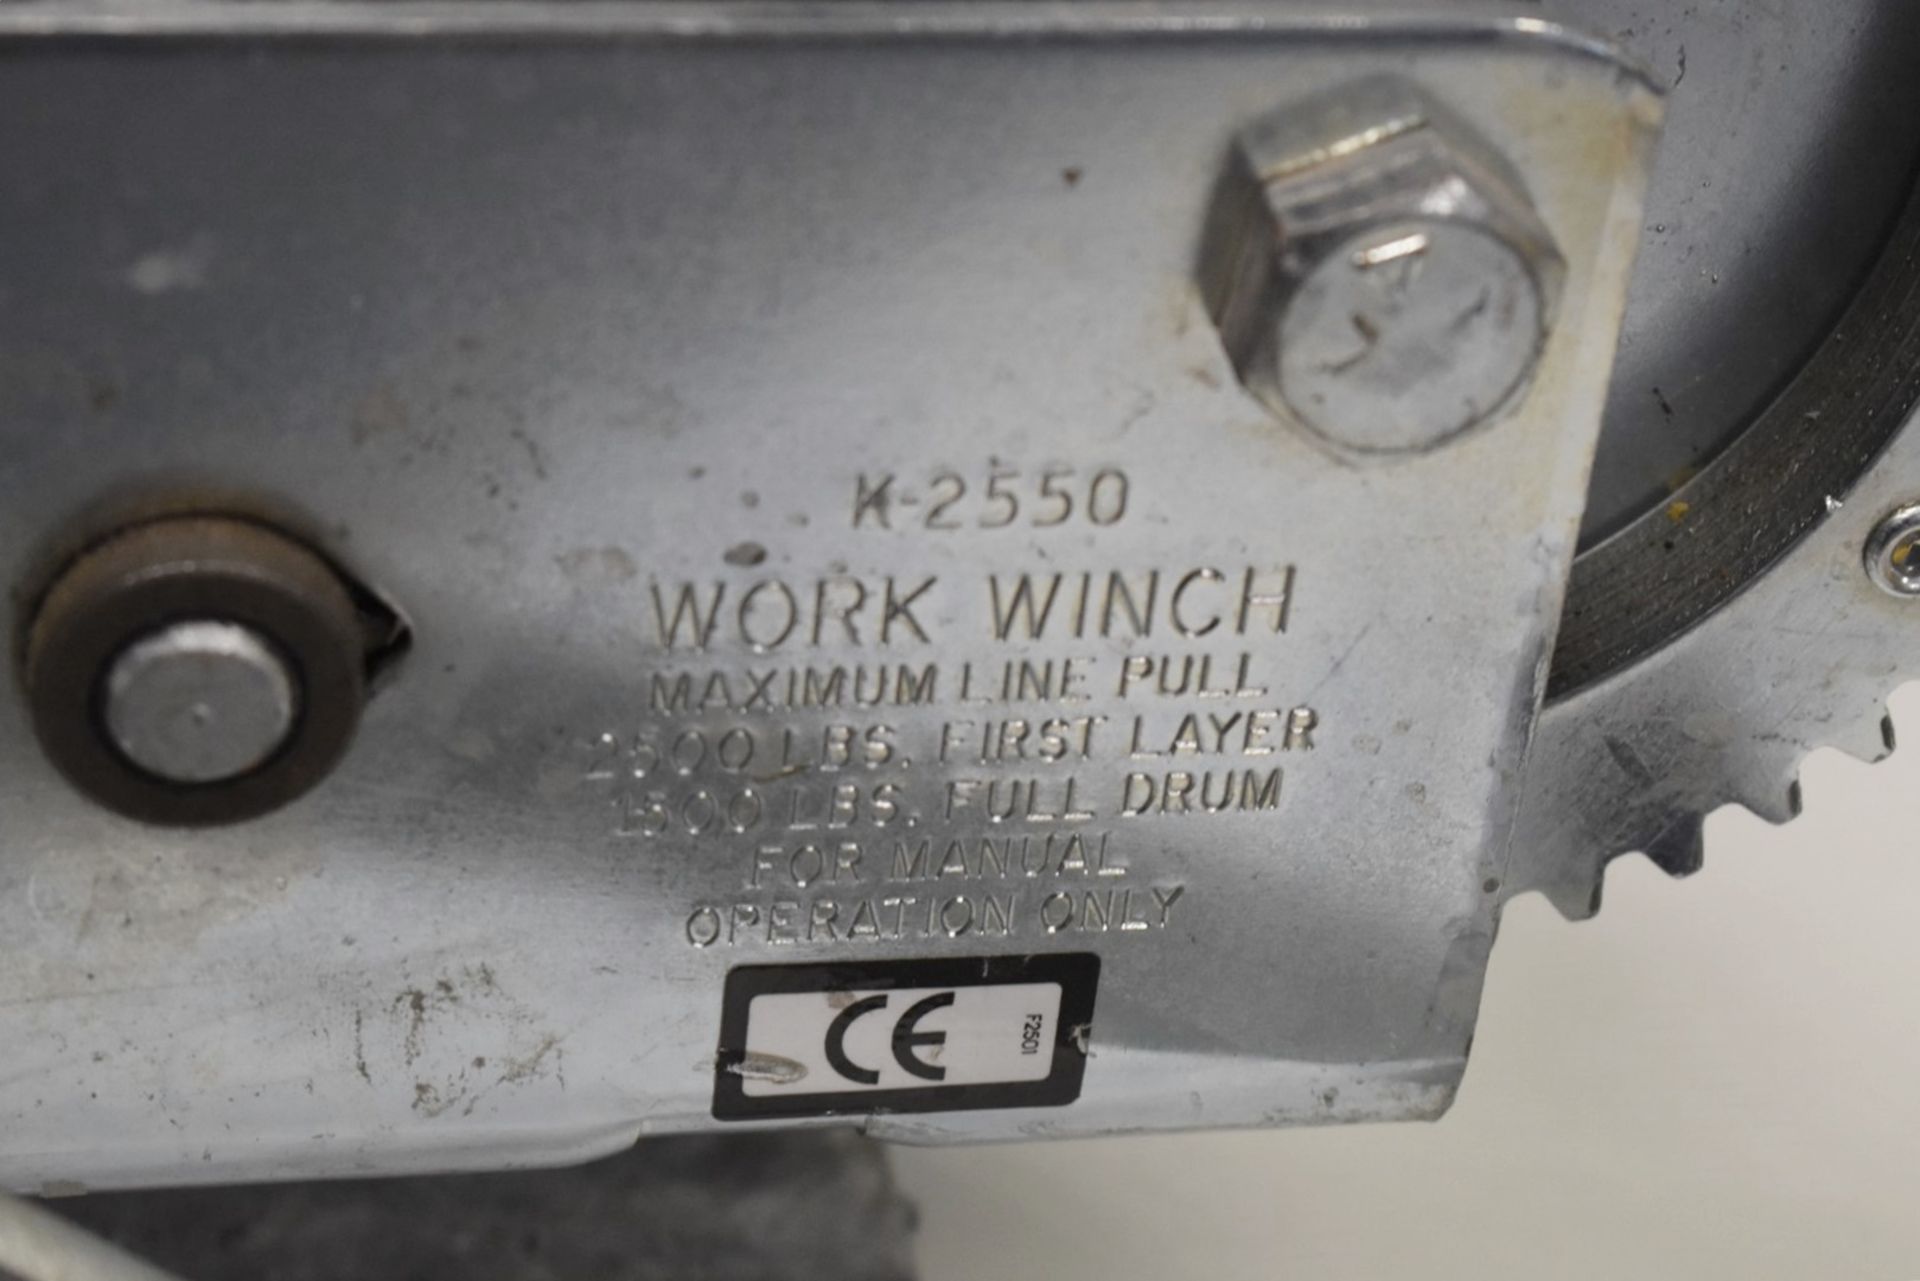 1 x K-2550 Work Winch - Ref FE232 ODS - CL480 - Location: Nottingham NG15 - Image 6 of 6